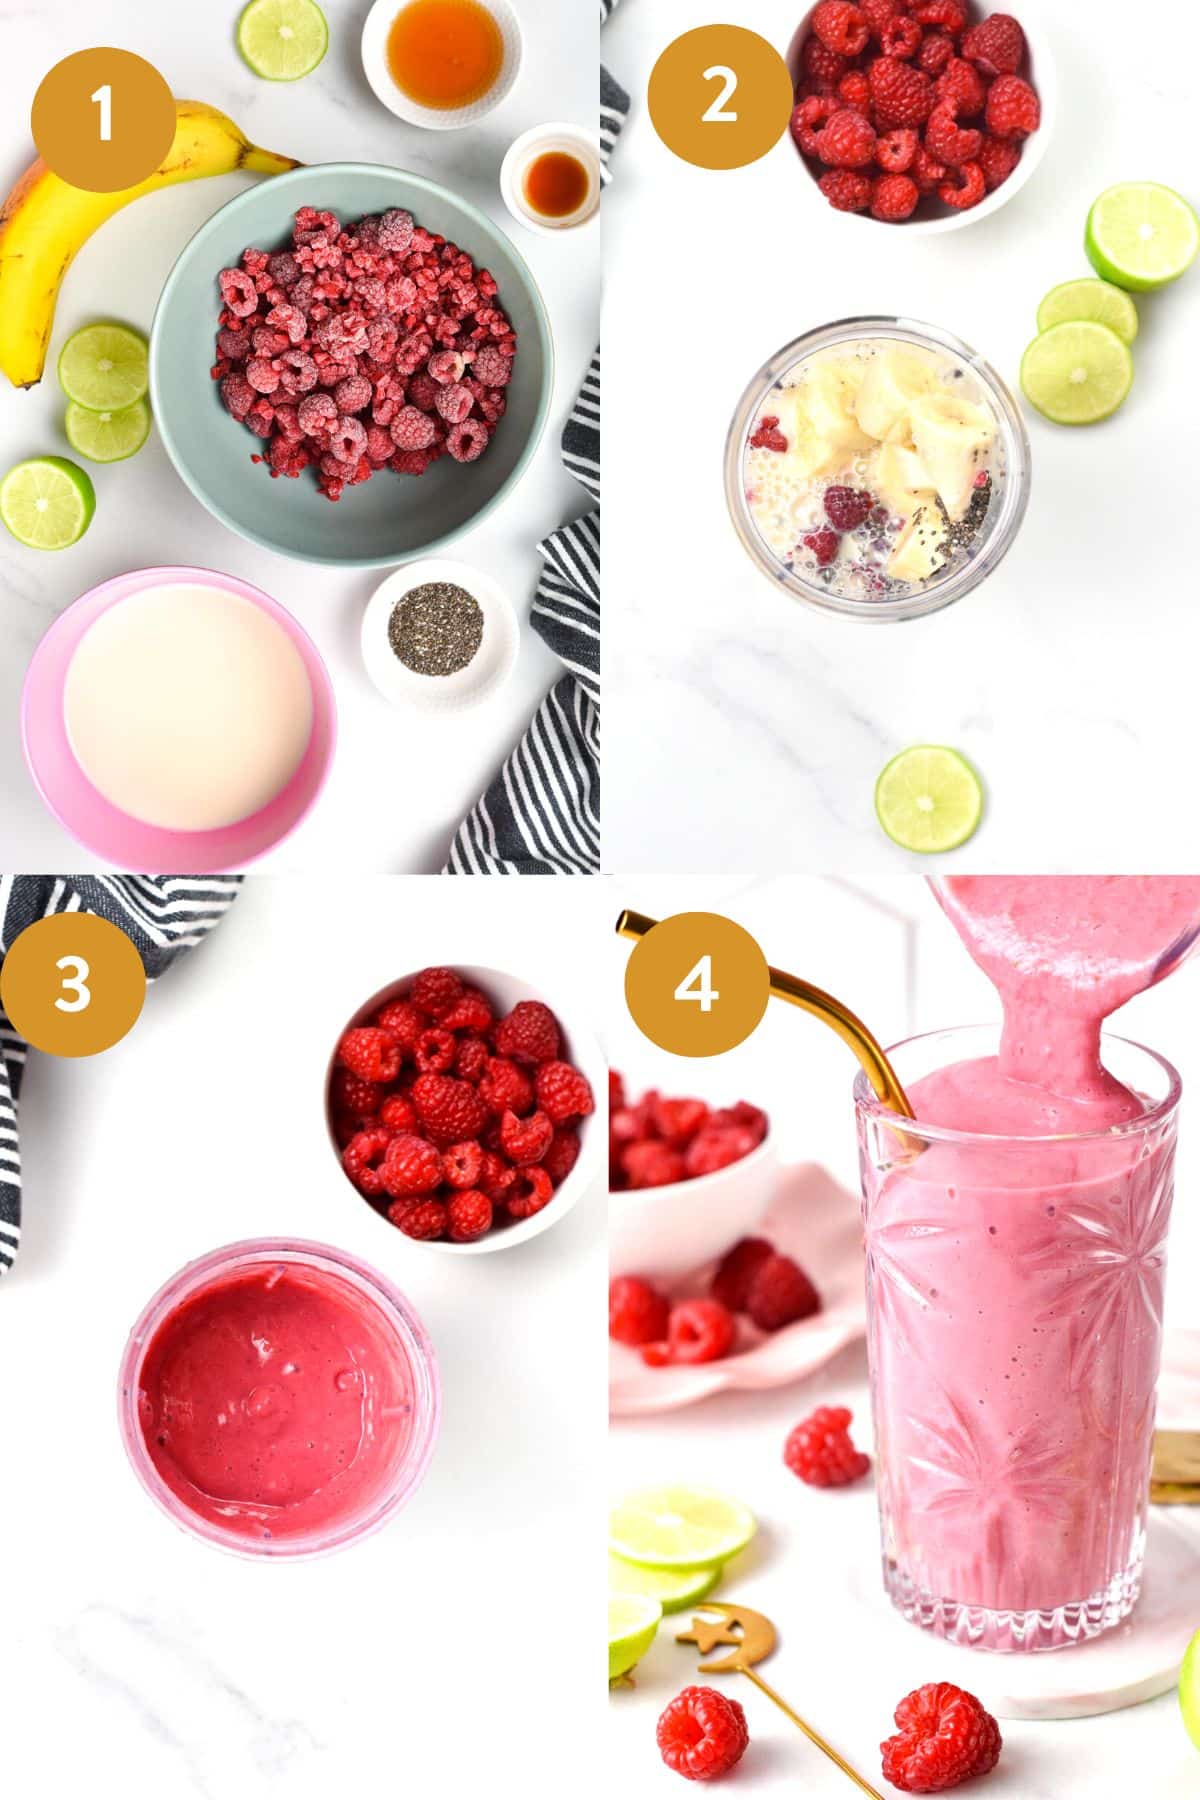 This Raspberry Smoothie recipe is the most refreshing smoothie with vibrant pink colors. Plus, raspberries are low-sugar and packed with antioxidants to pack inflammation.